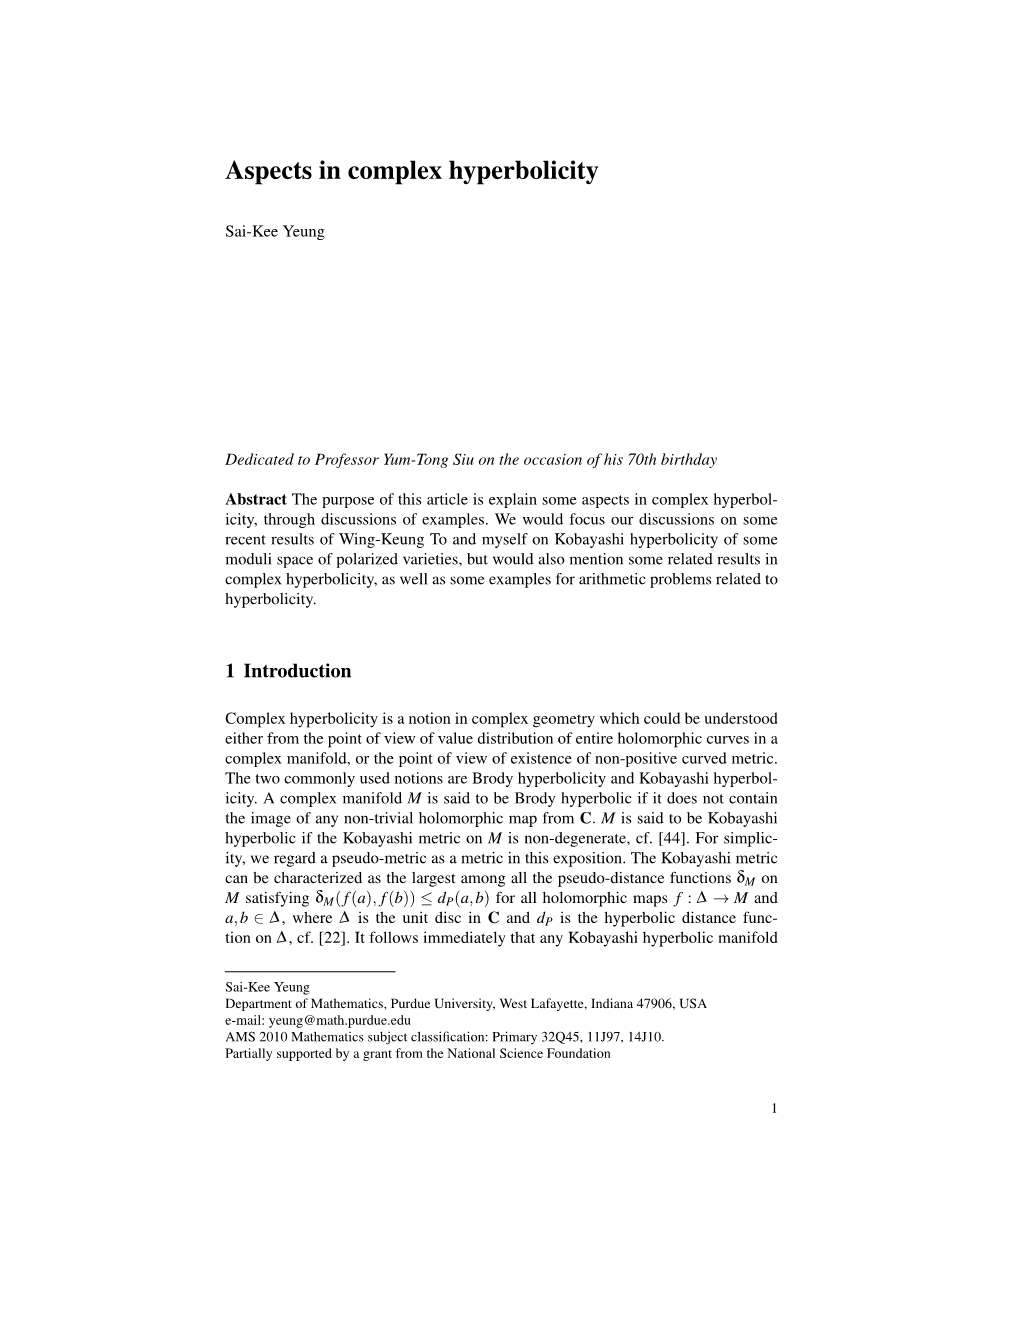 Aspects in Complex Hyperbolicity